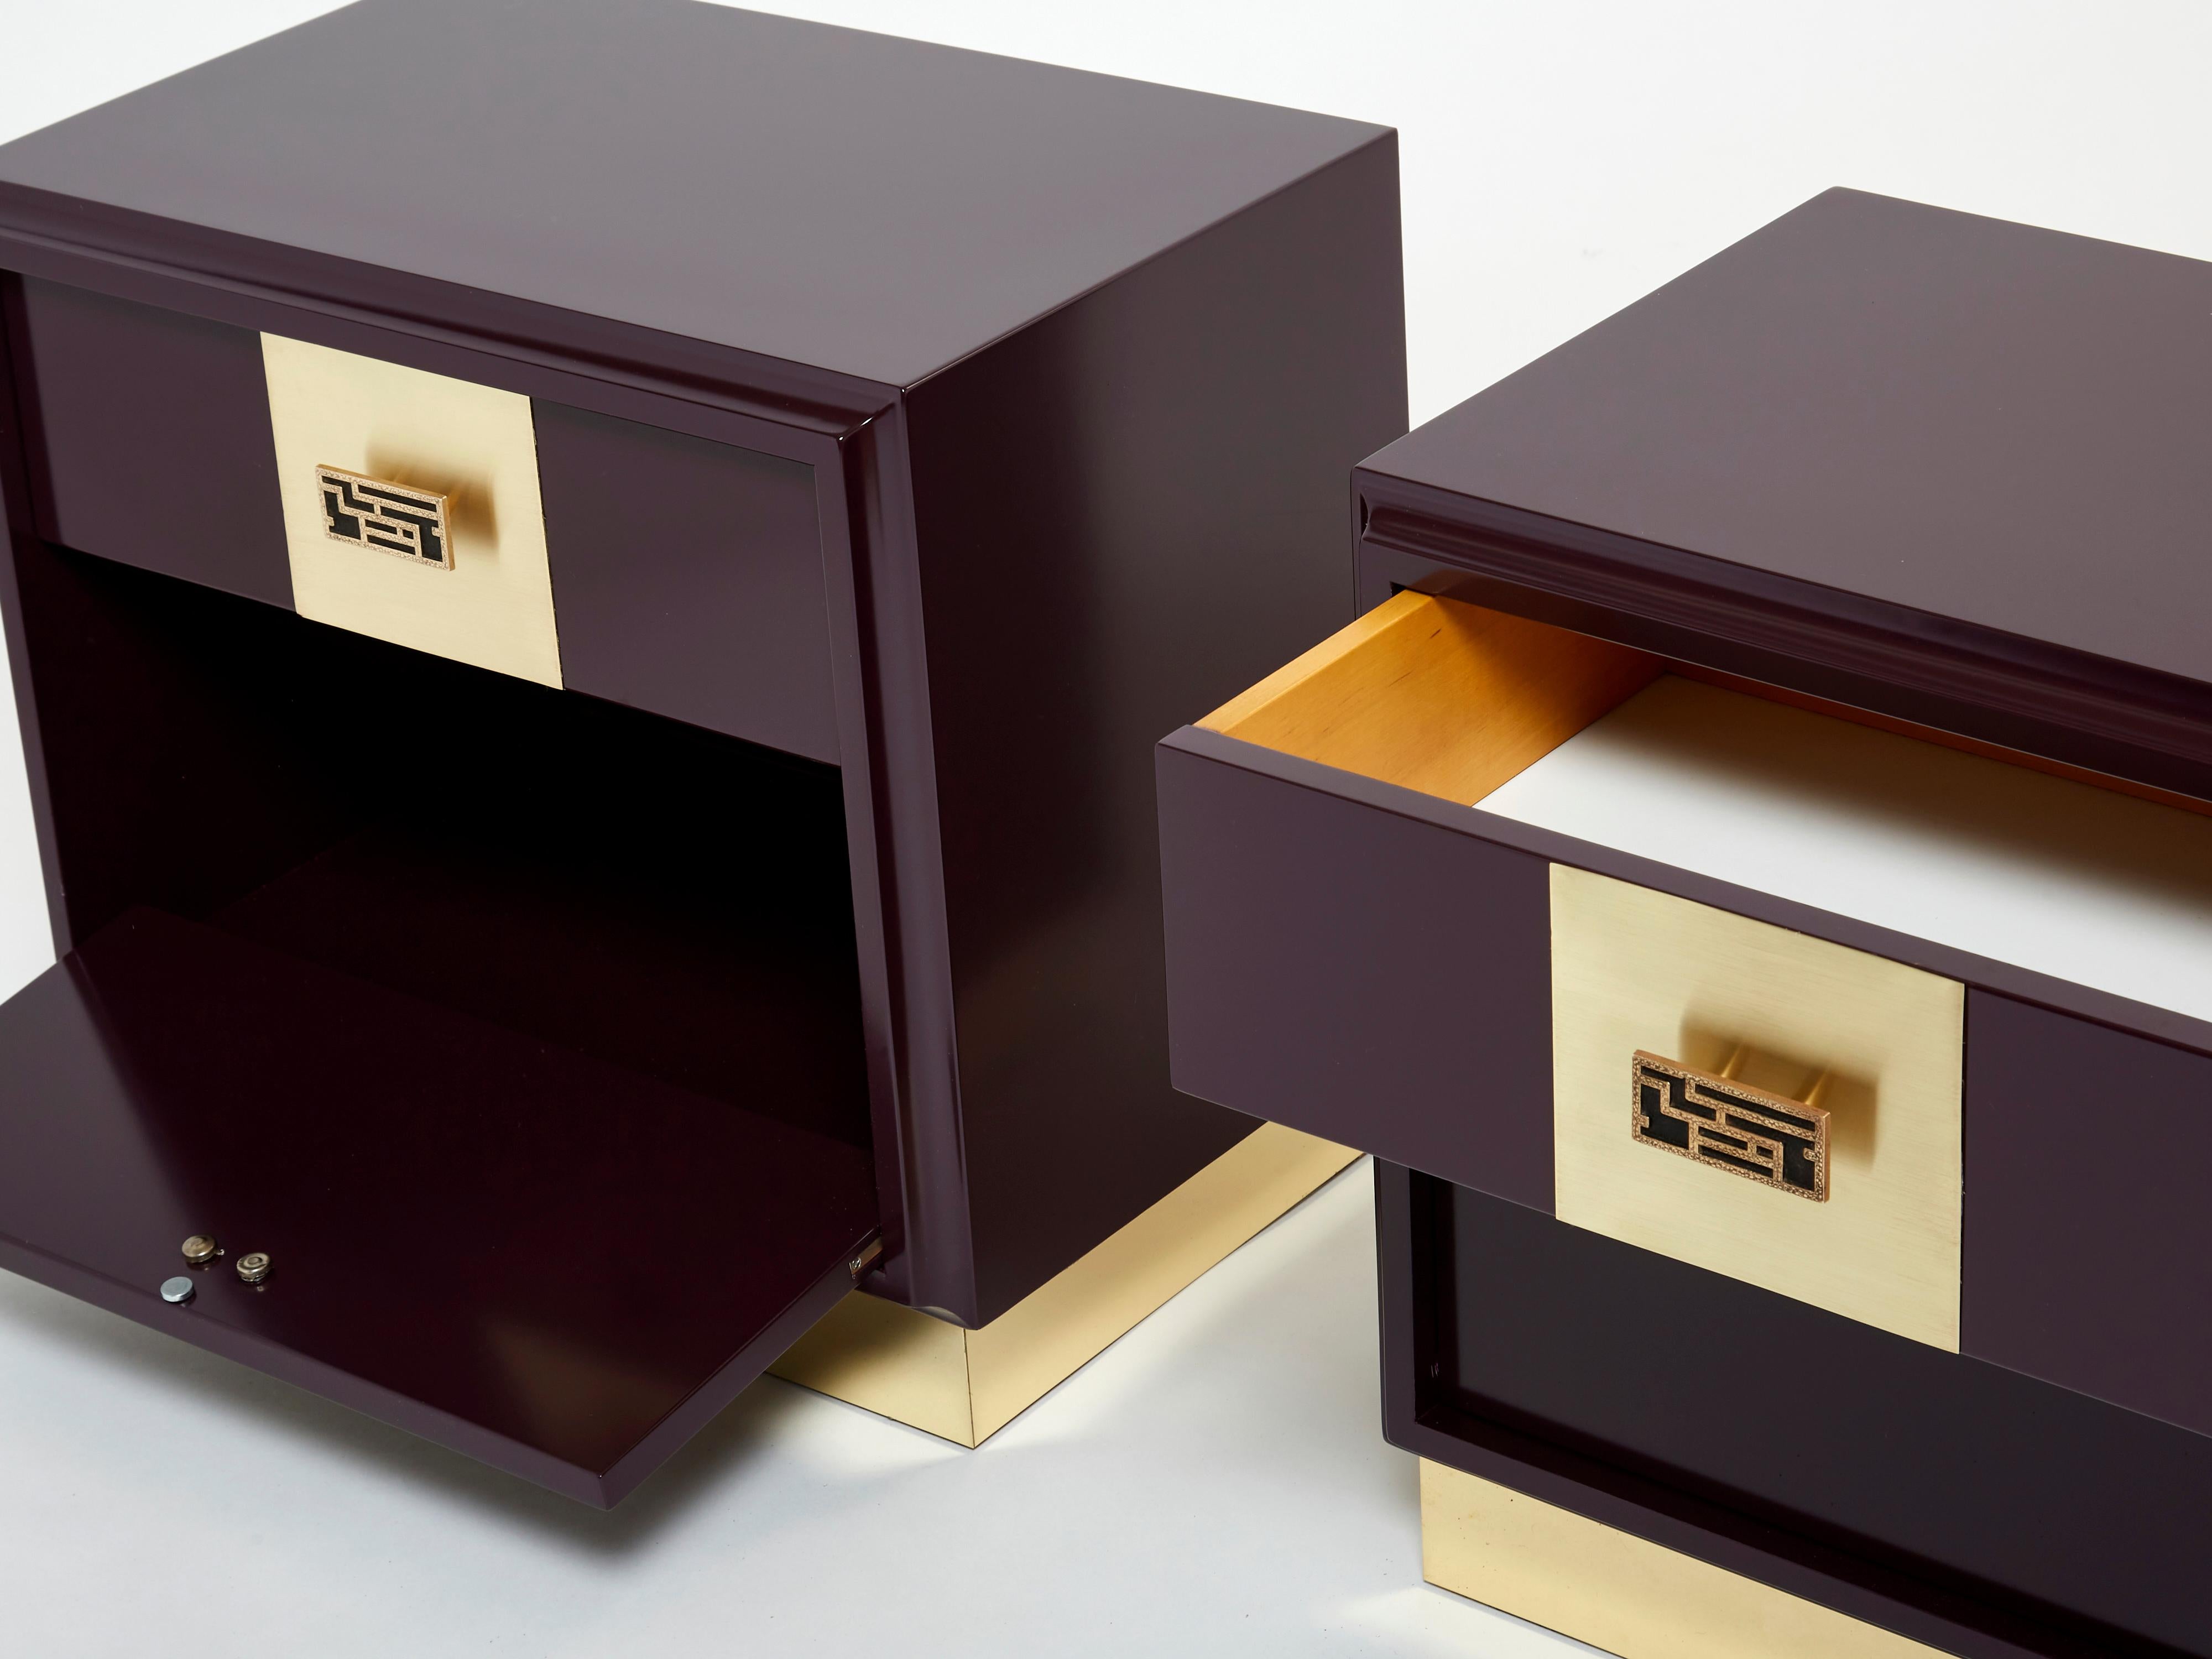 Pair of Italian Luciano Frigerio Plum Lacquered Brass Nightstands Tables, 1970s For Sale 3